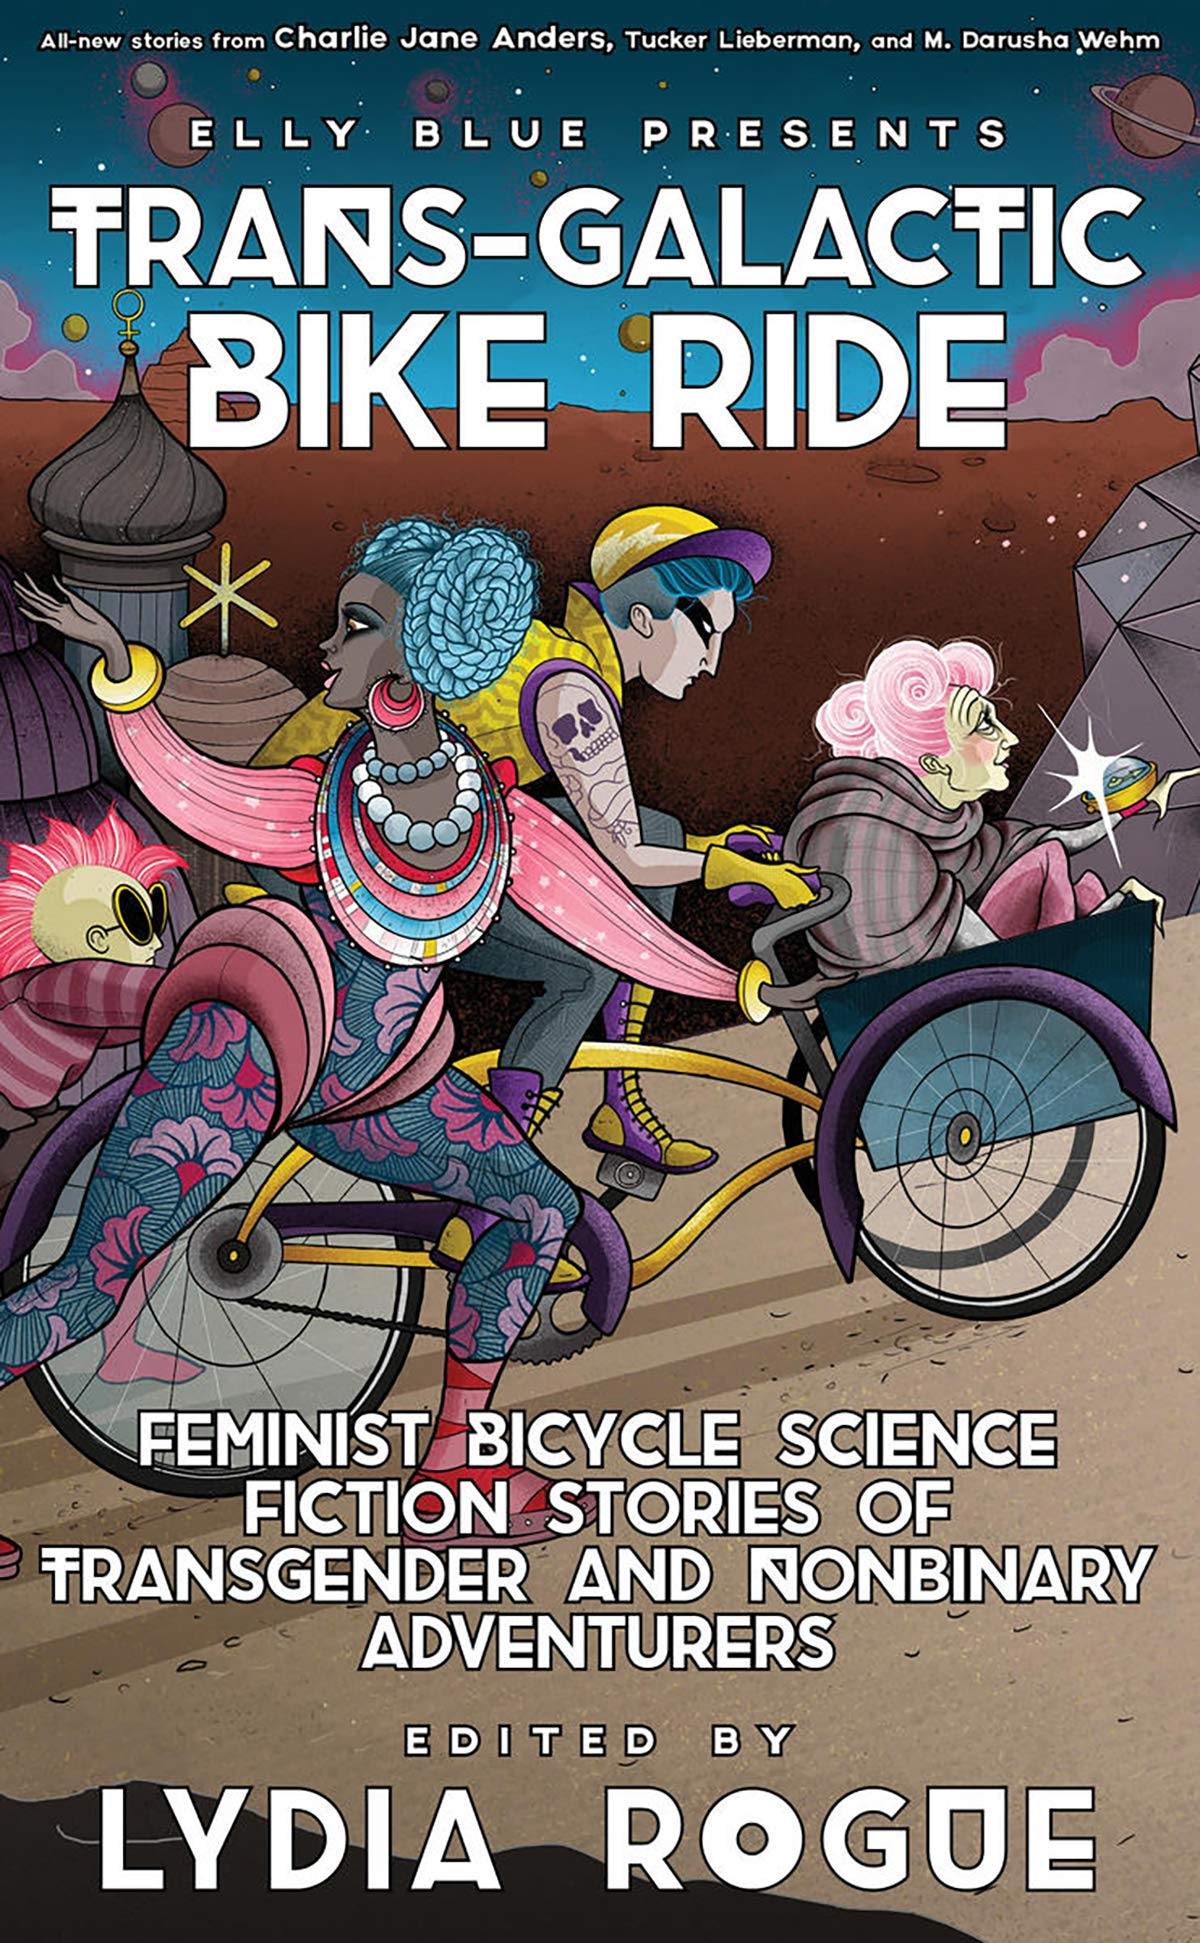 Elly Blue Presents Trans-Galatic Bike Ride. Feminist Bicycle Science Fiction Stories of Transgender and NonBinary Adventures, Edited by Lydia Rogue